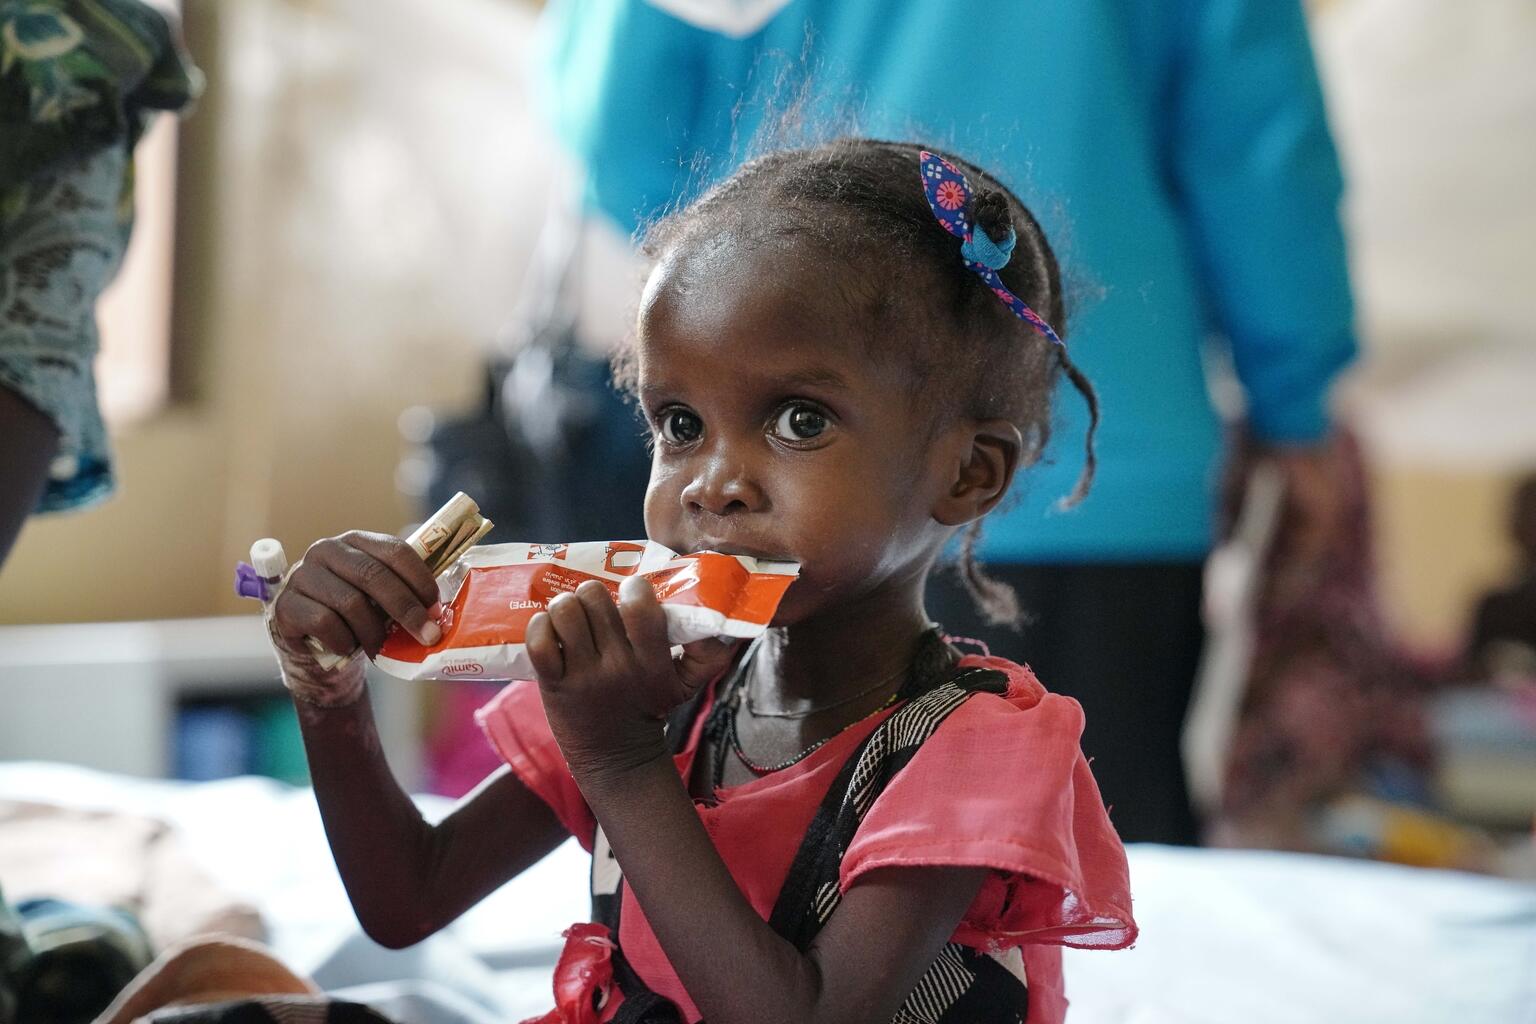 A Sudanese child suffering from malnutrition sits and eats a plumpy nut, a type of ready-to-use therapeutic food. 